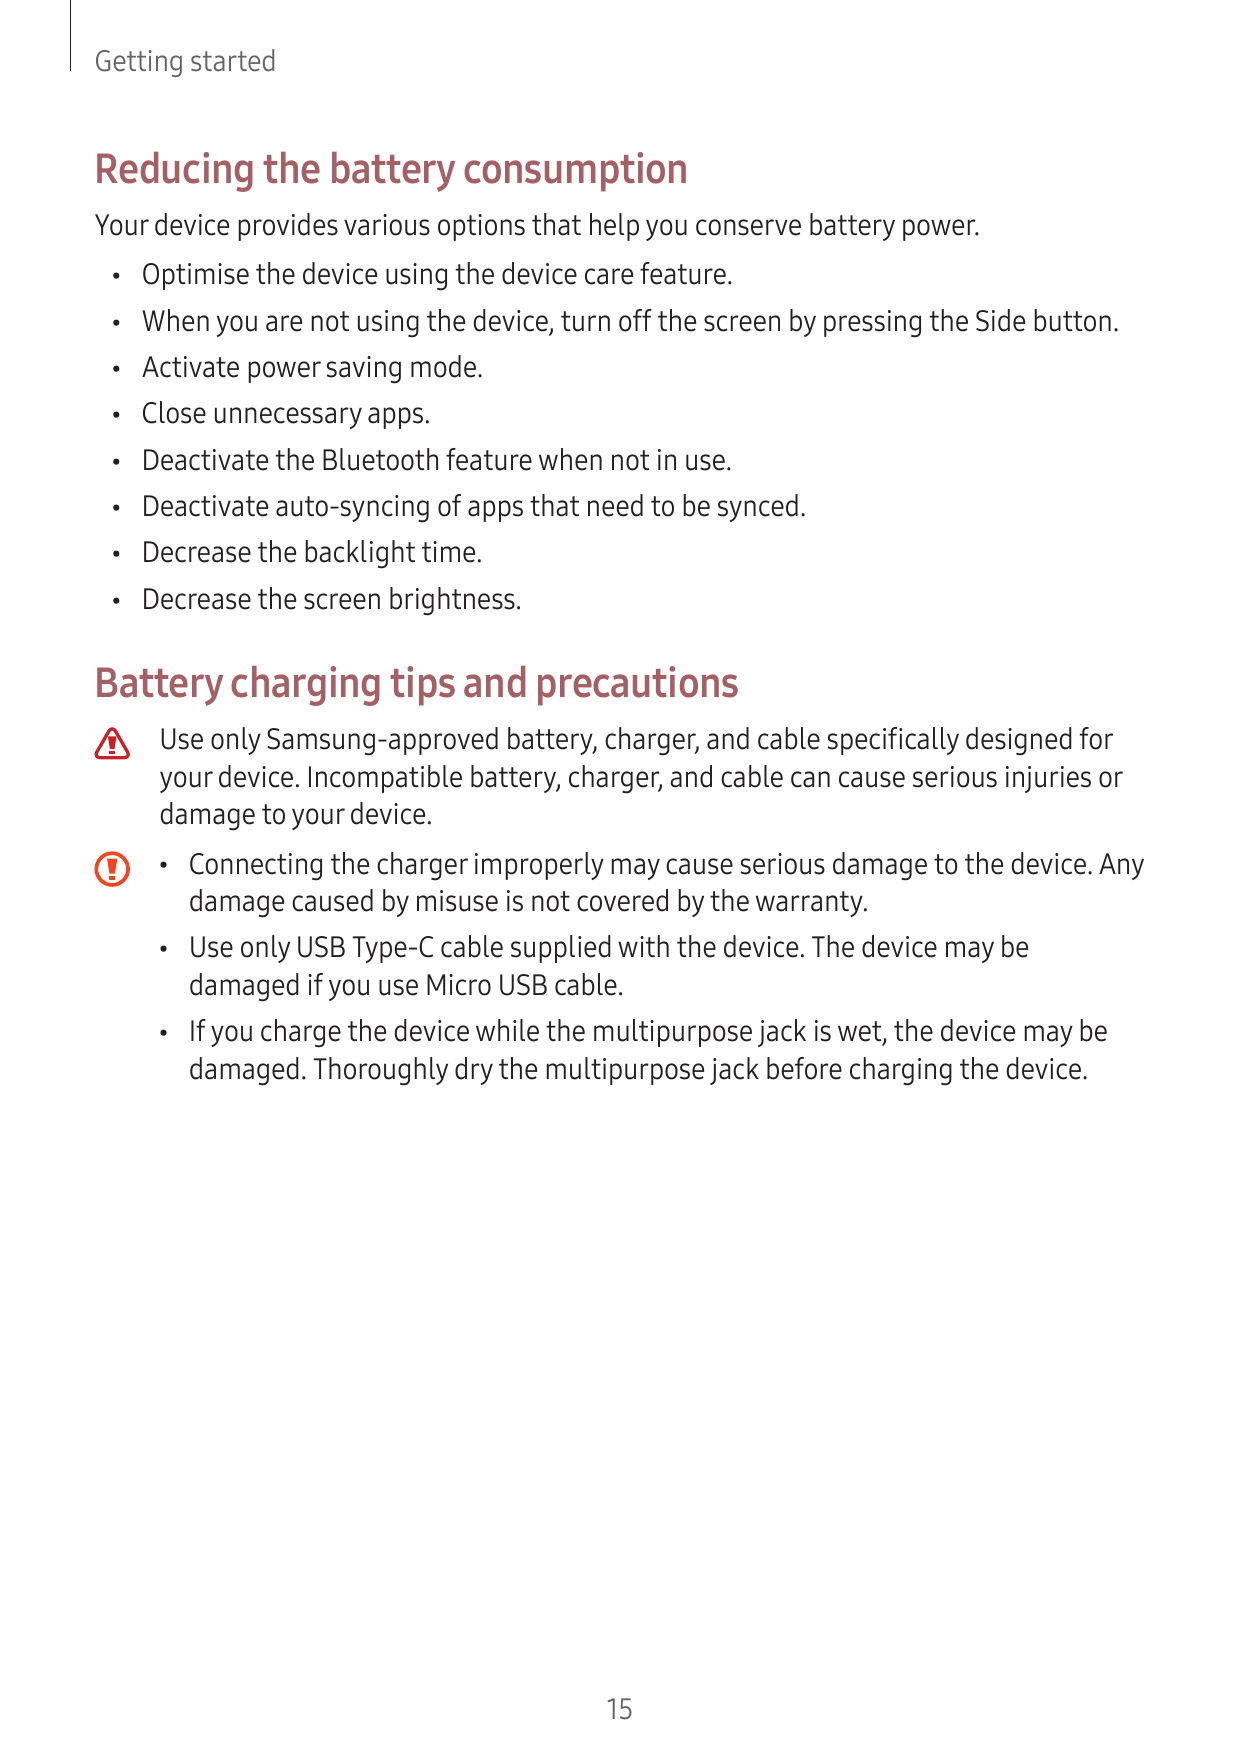 Getting startedReducing the battery consumptionYour device provides various options that help you conserve battery power.•Optimi